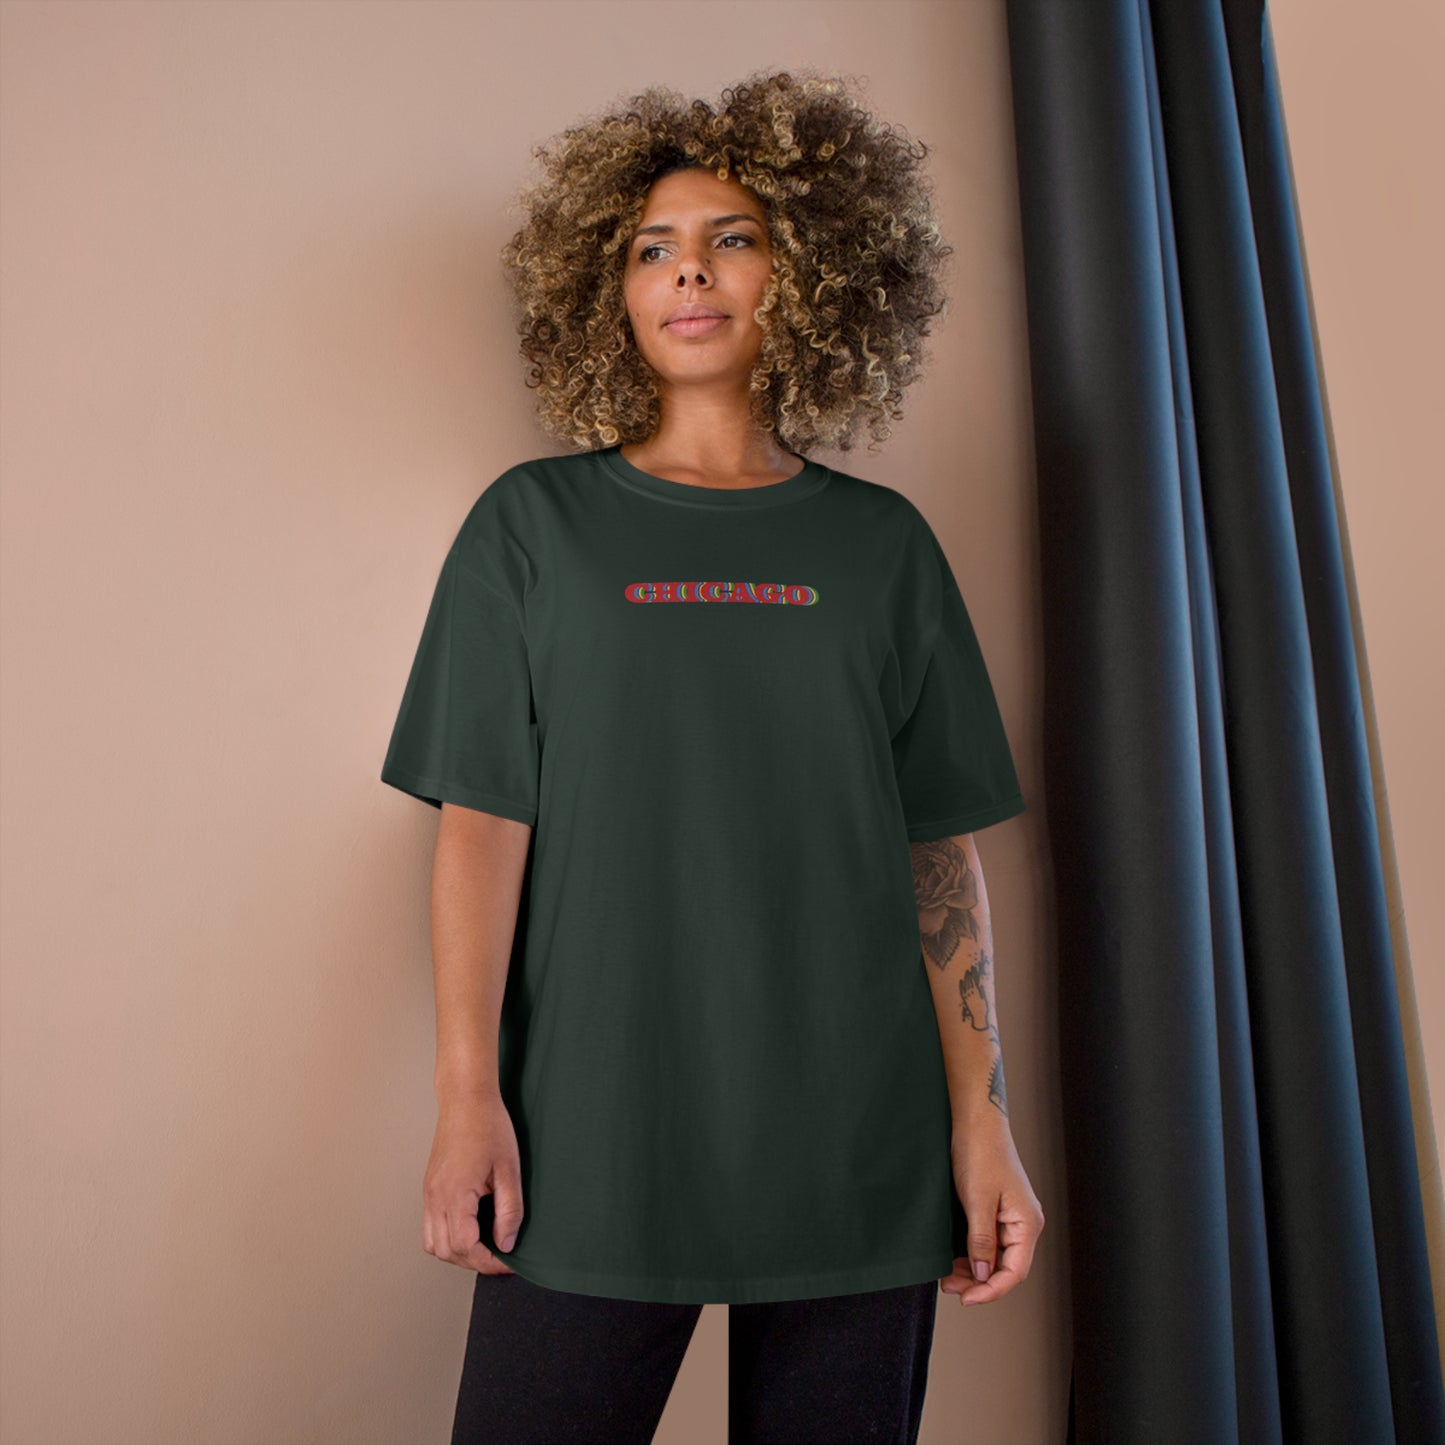 CHI-CTY - The Loop | Tee